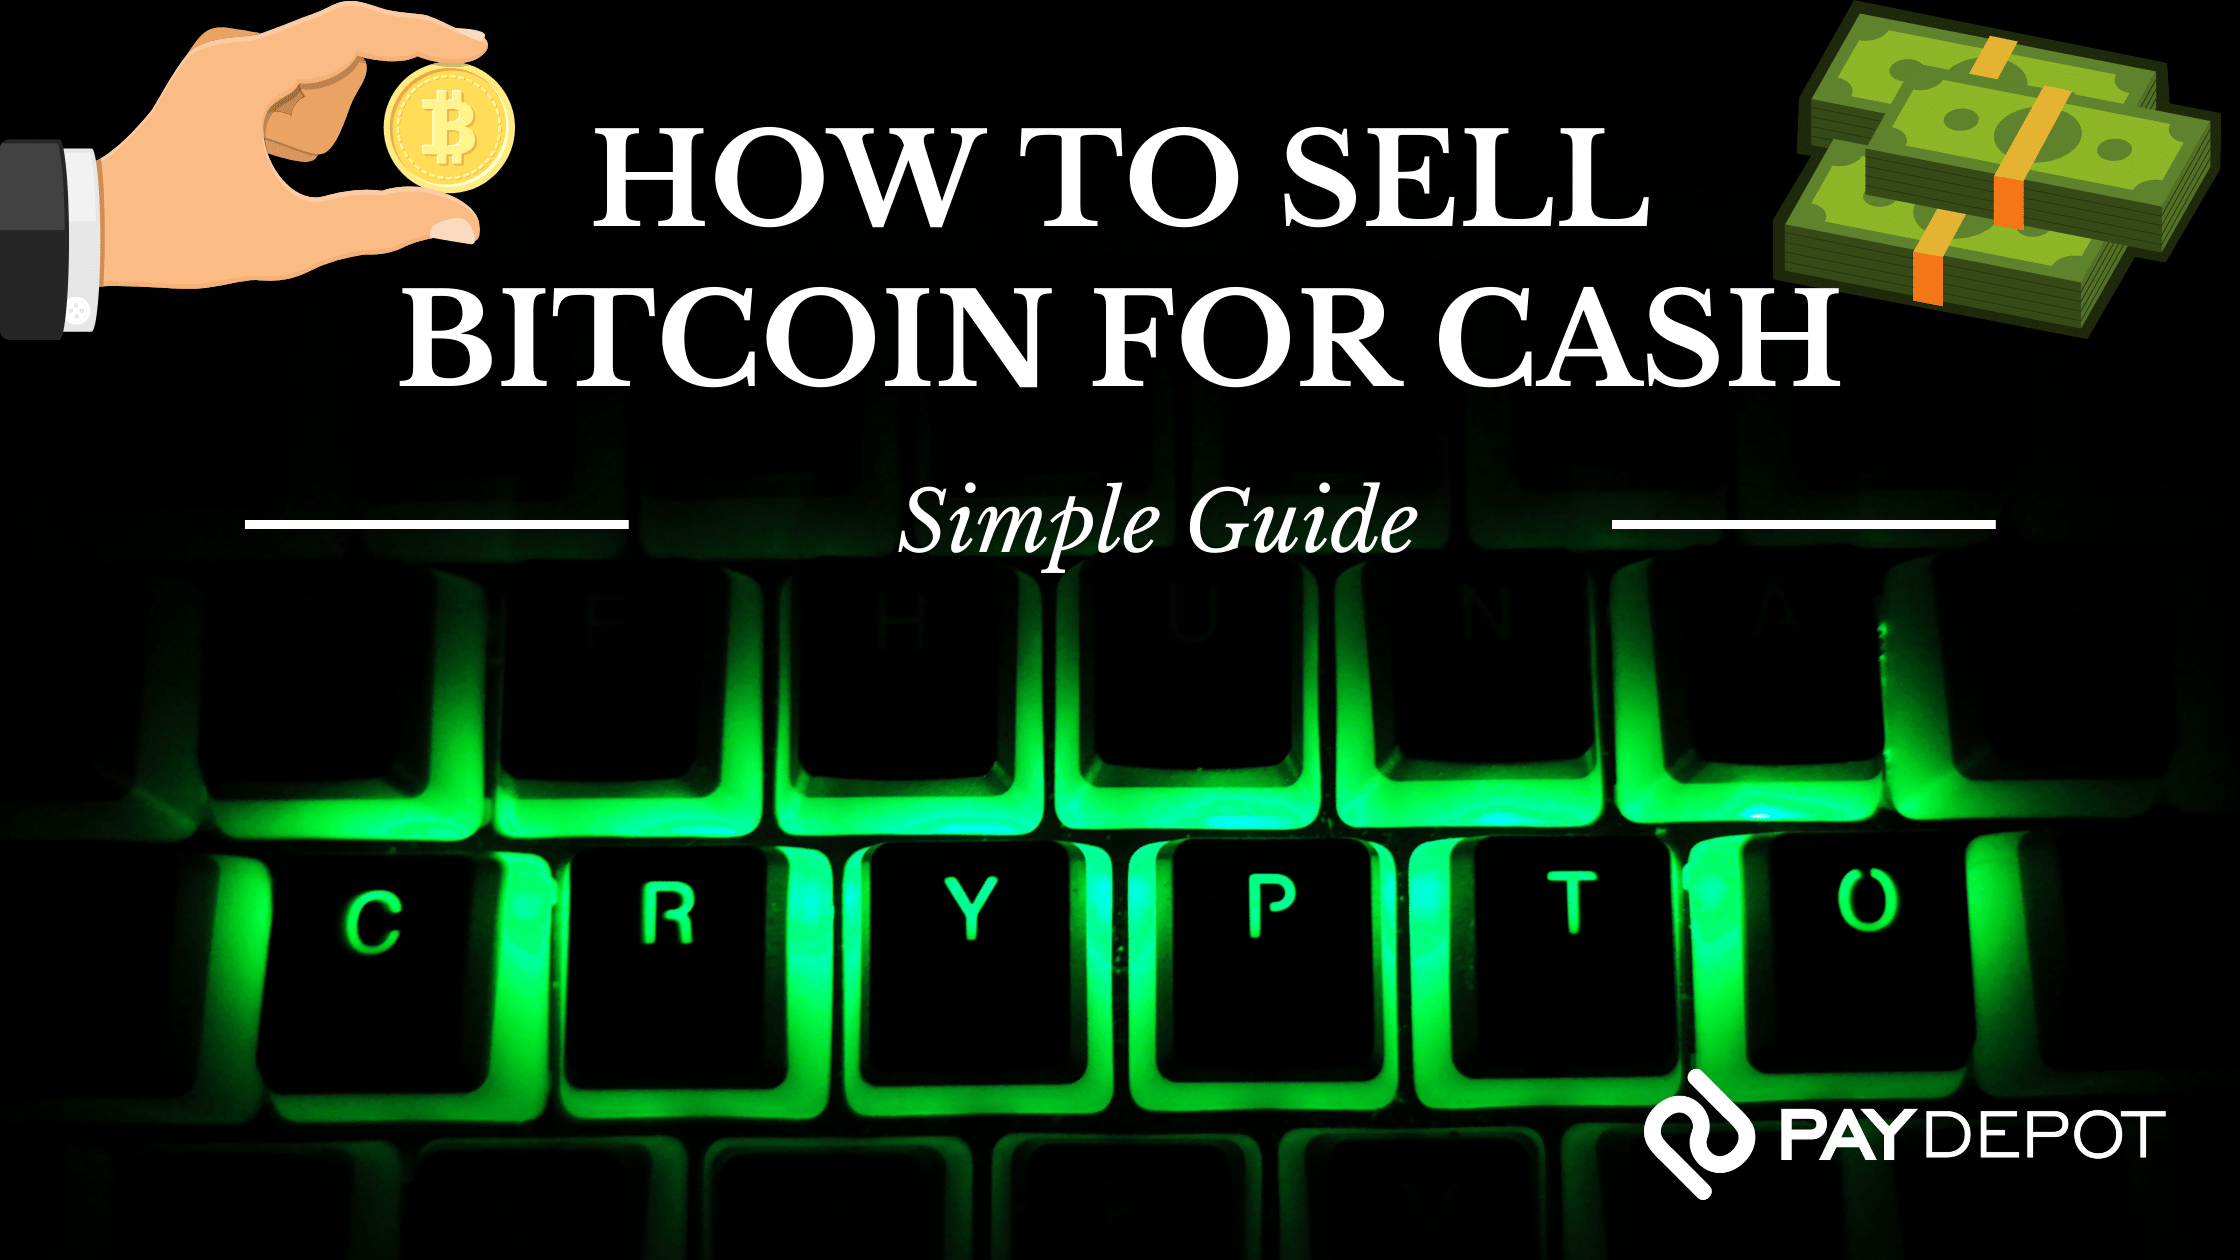 How to Sell Bitcoin (BTC) for Cash: A Simple Guide